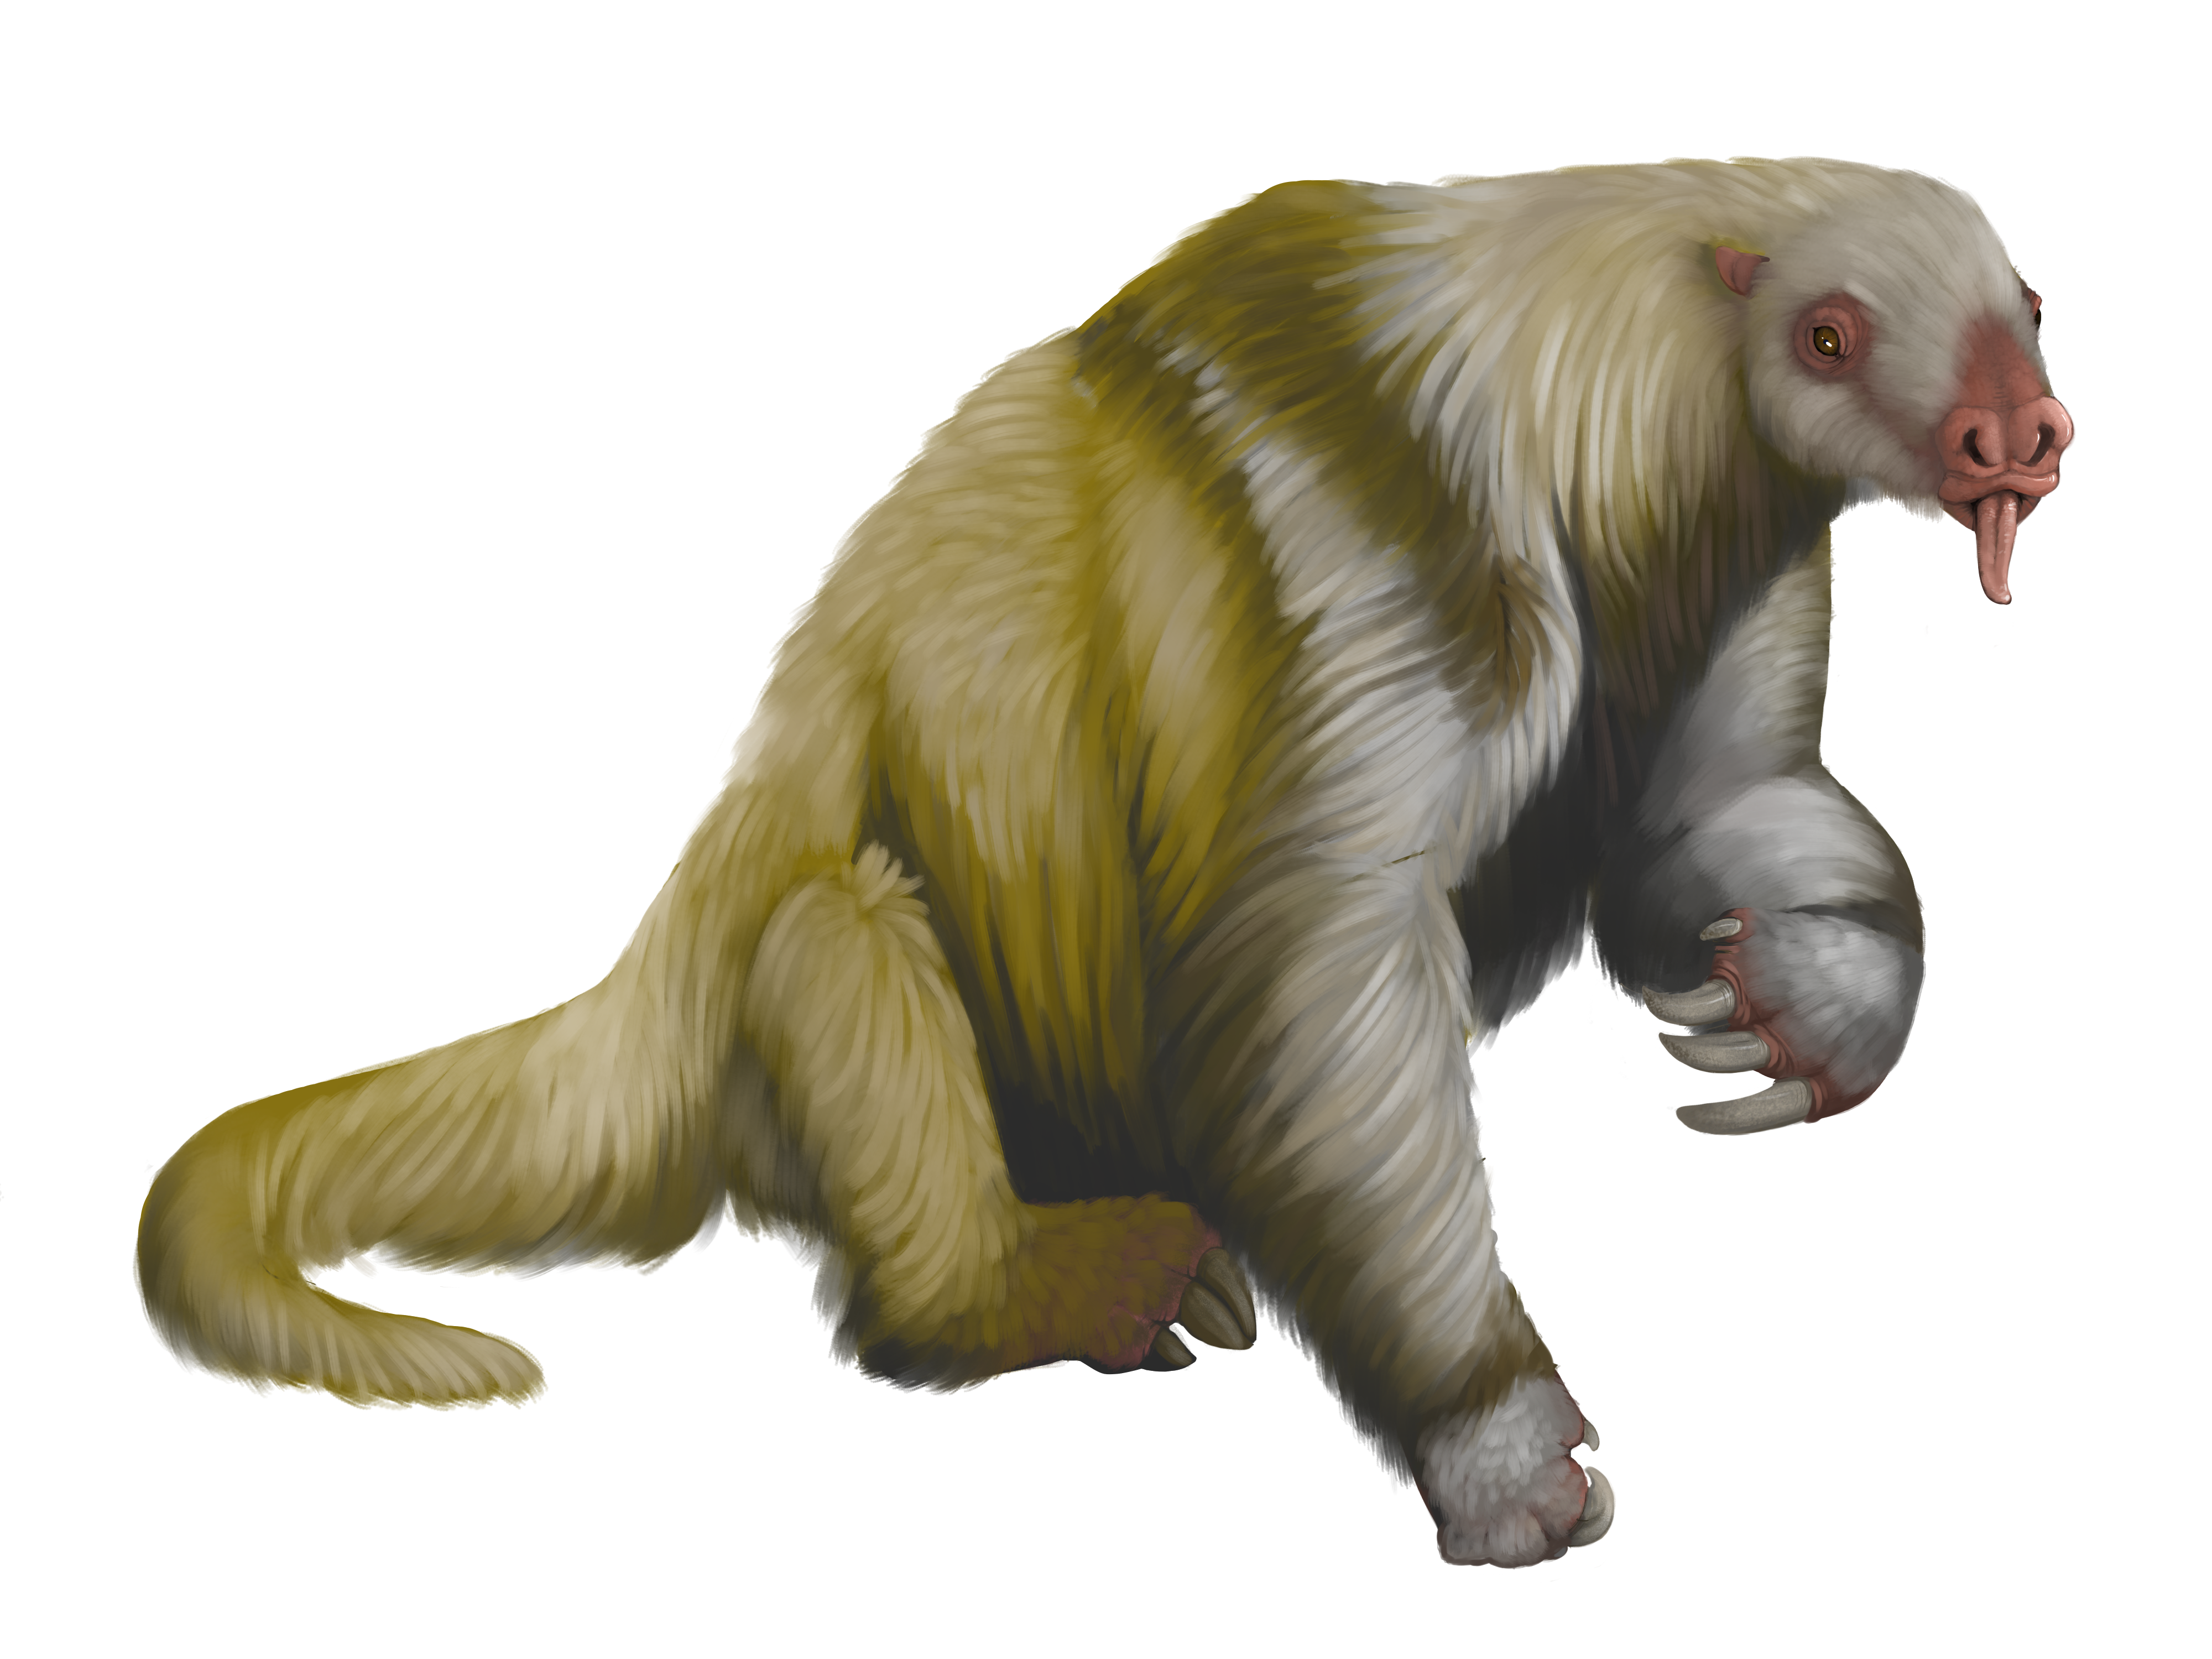 illustration of a giant ground sloth